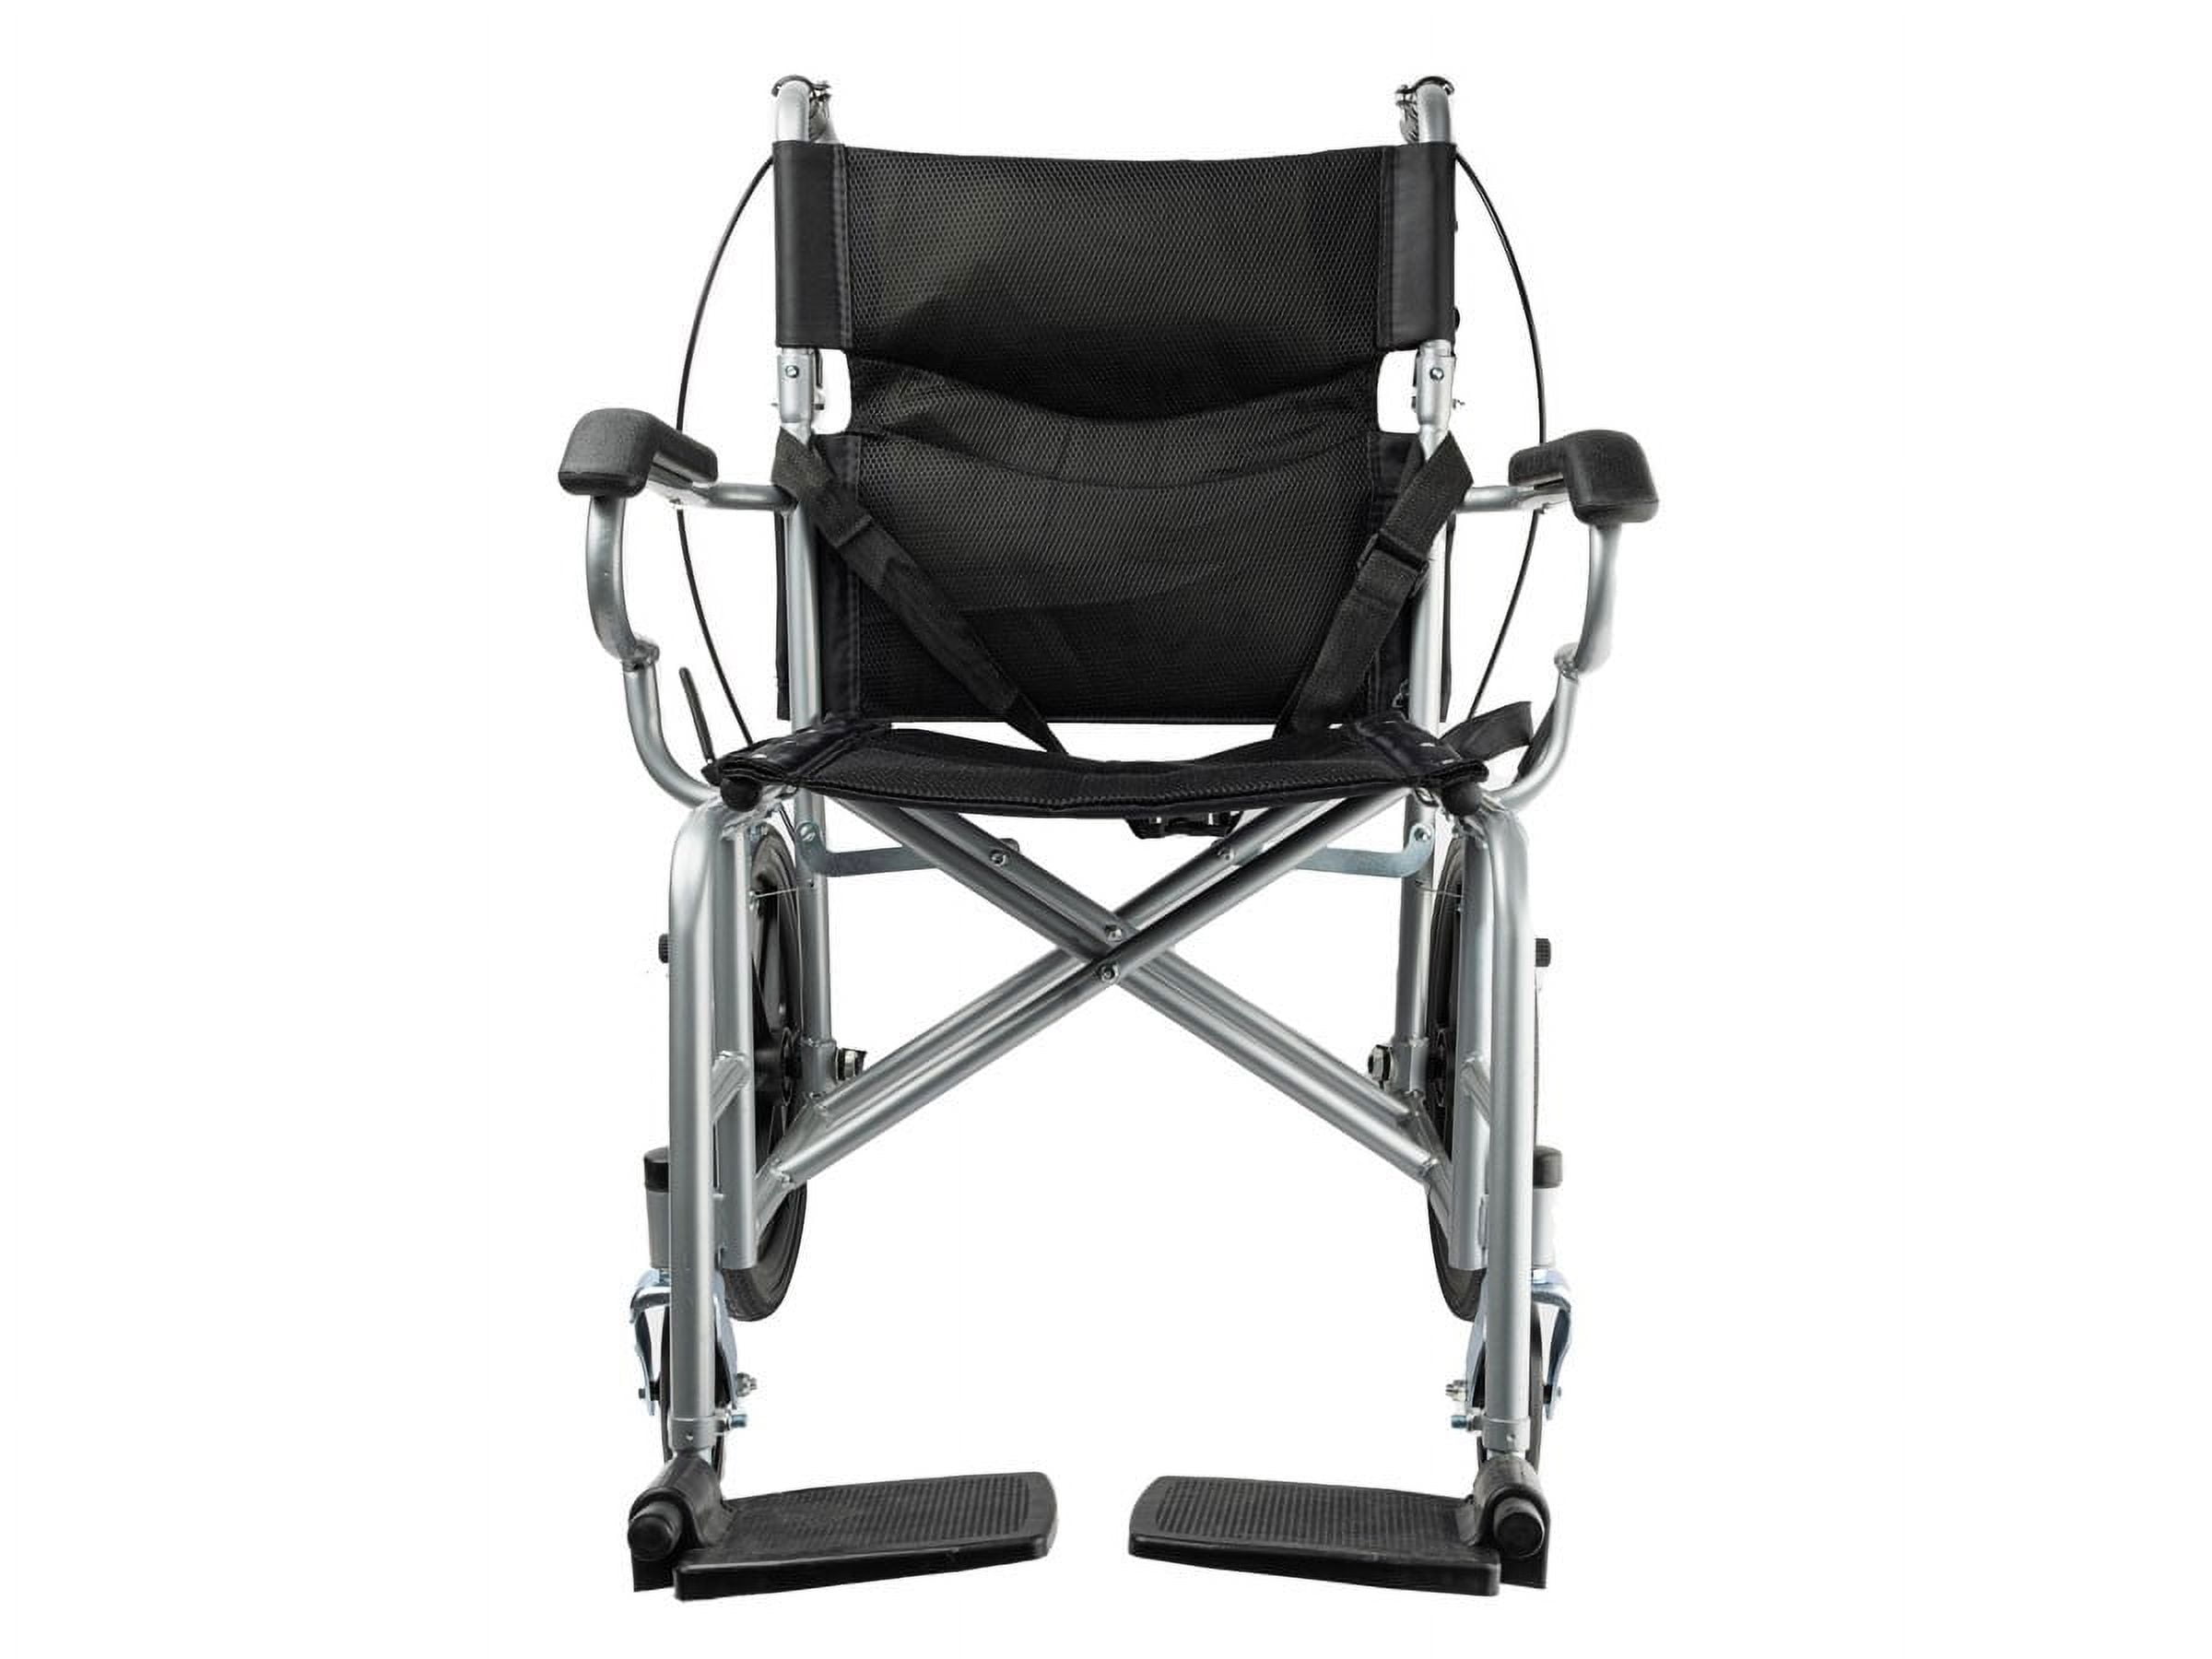 Monicare *FDA APPROVED* Transport Wheelchair With 18 inch Seat, Folding  Transport Chair with Swing Away Footrests and Flip Back Backrest, Folding